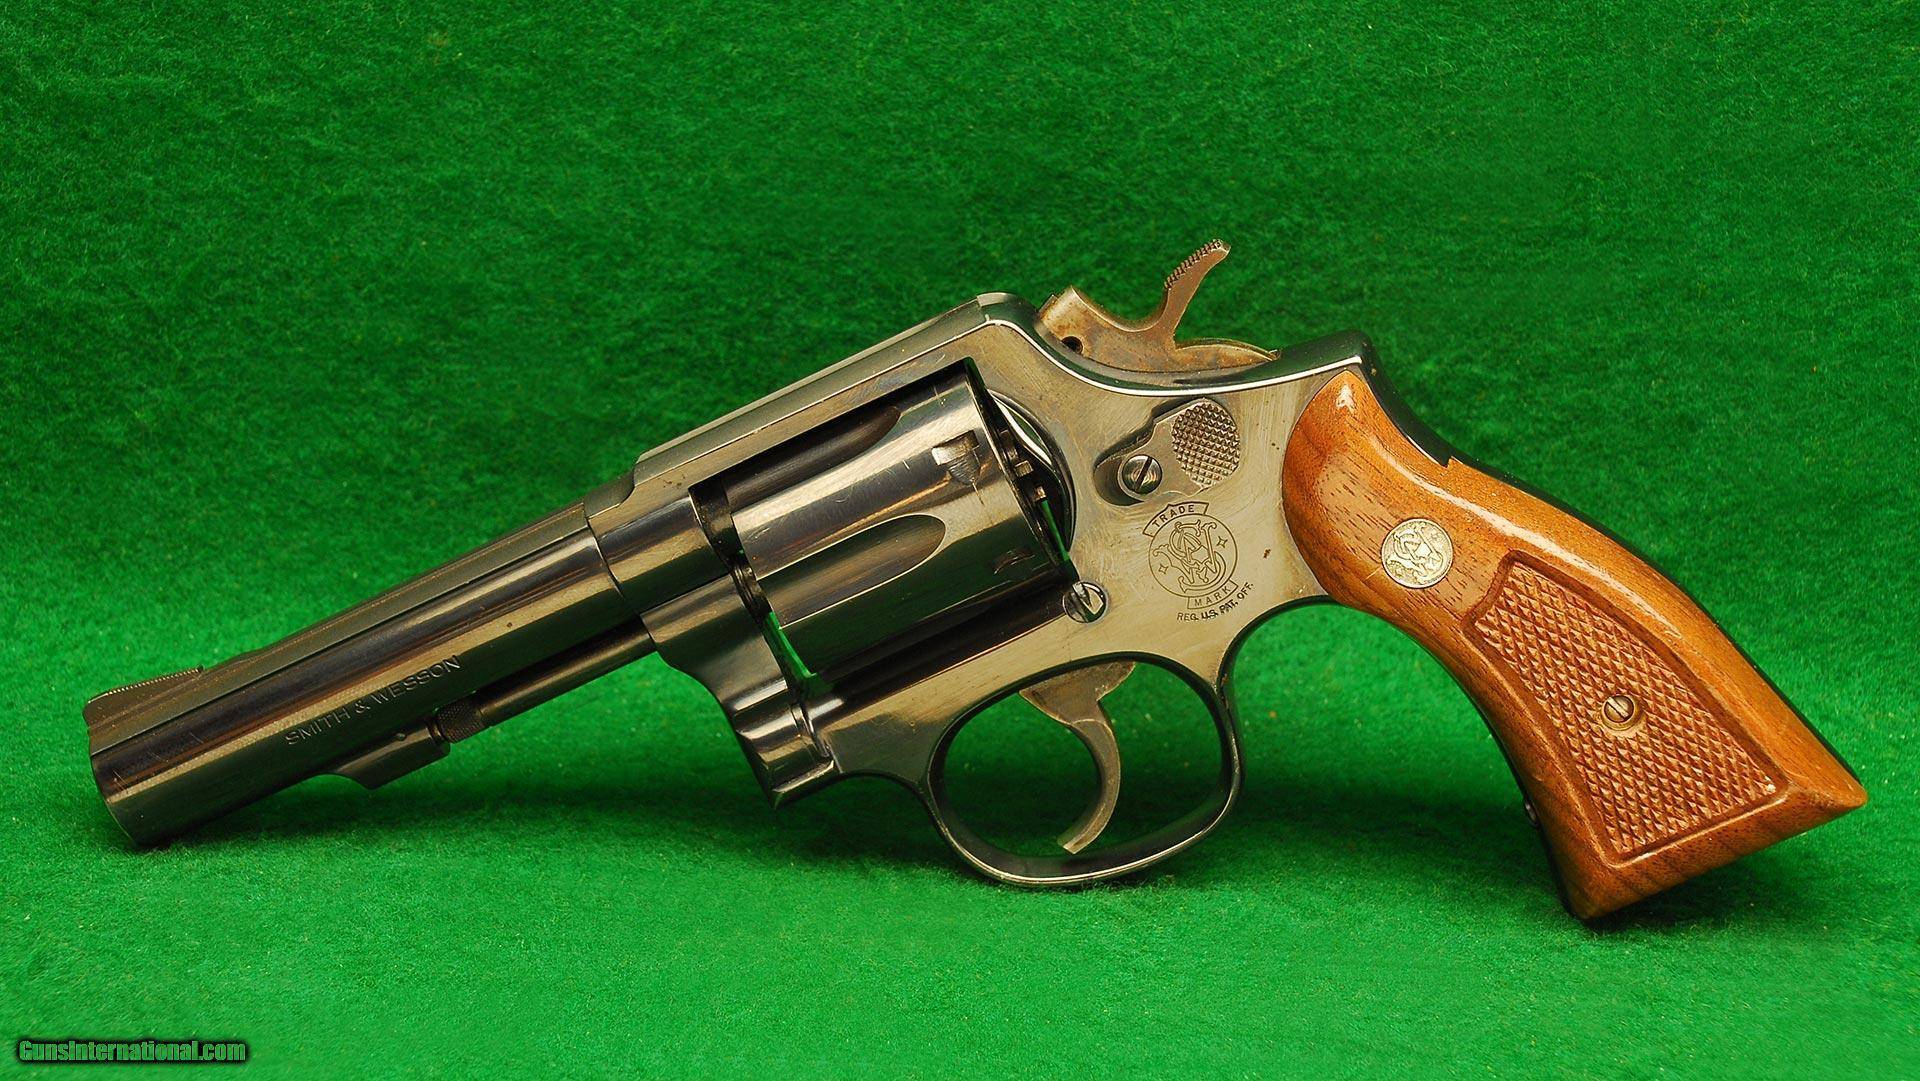 Smith & wesson model 10 - smith & wesson model 10 - qwe.wiki